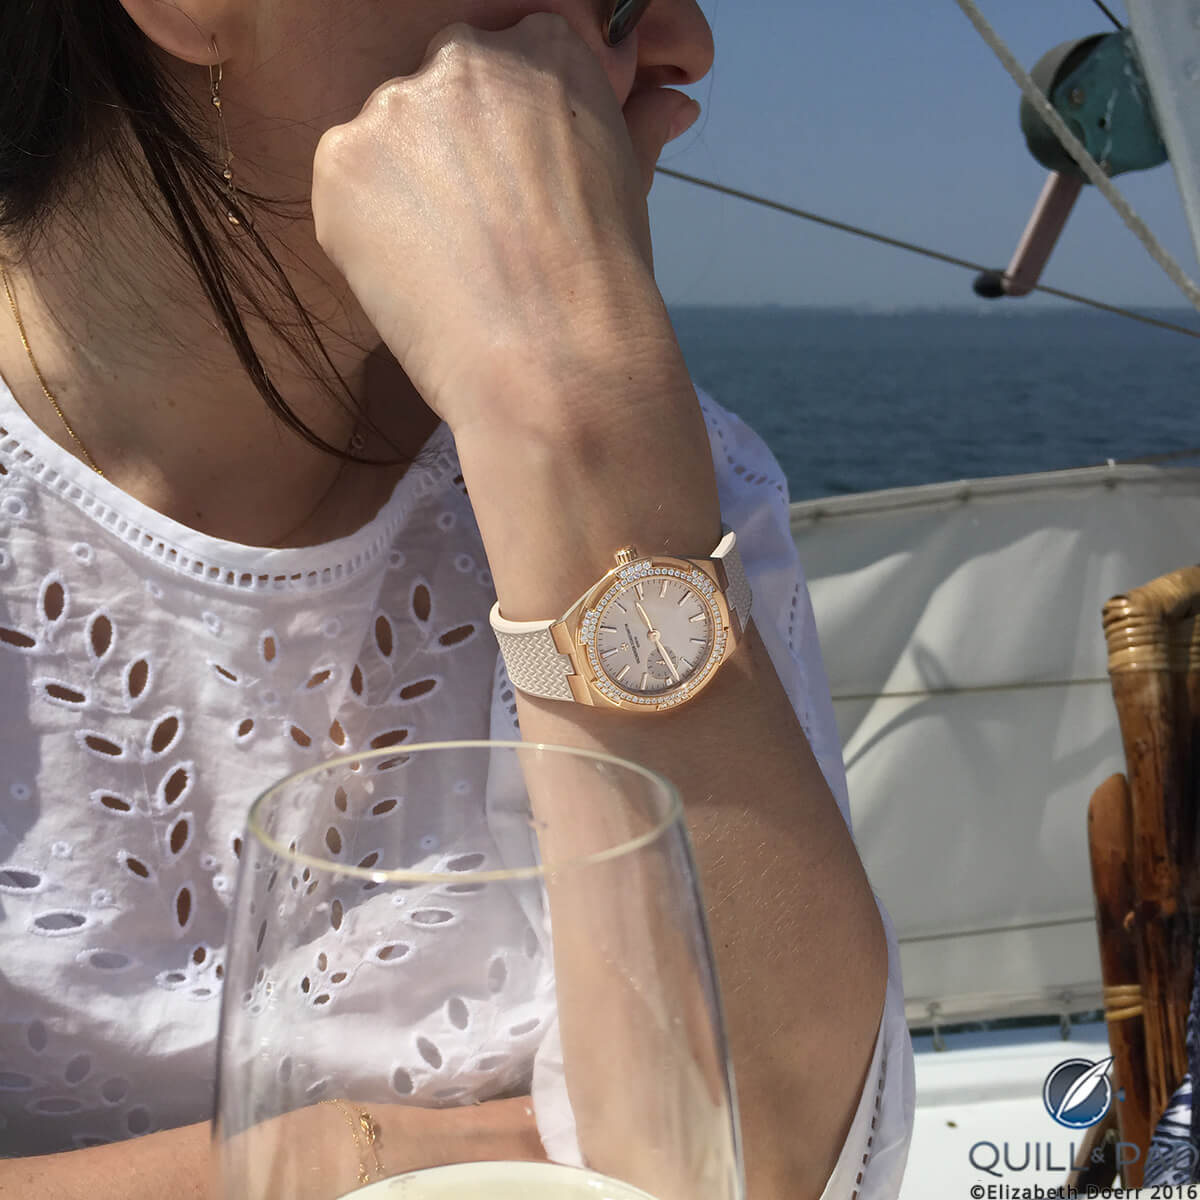 The Vacheron Constantin Overseas small model is perfect for the female wrist